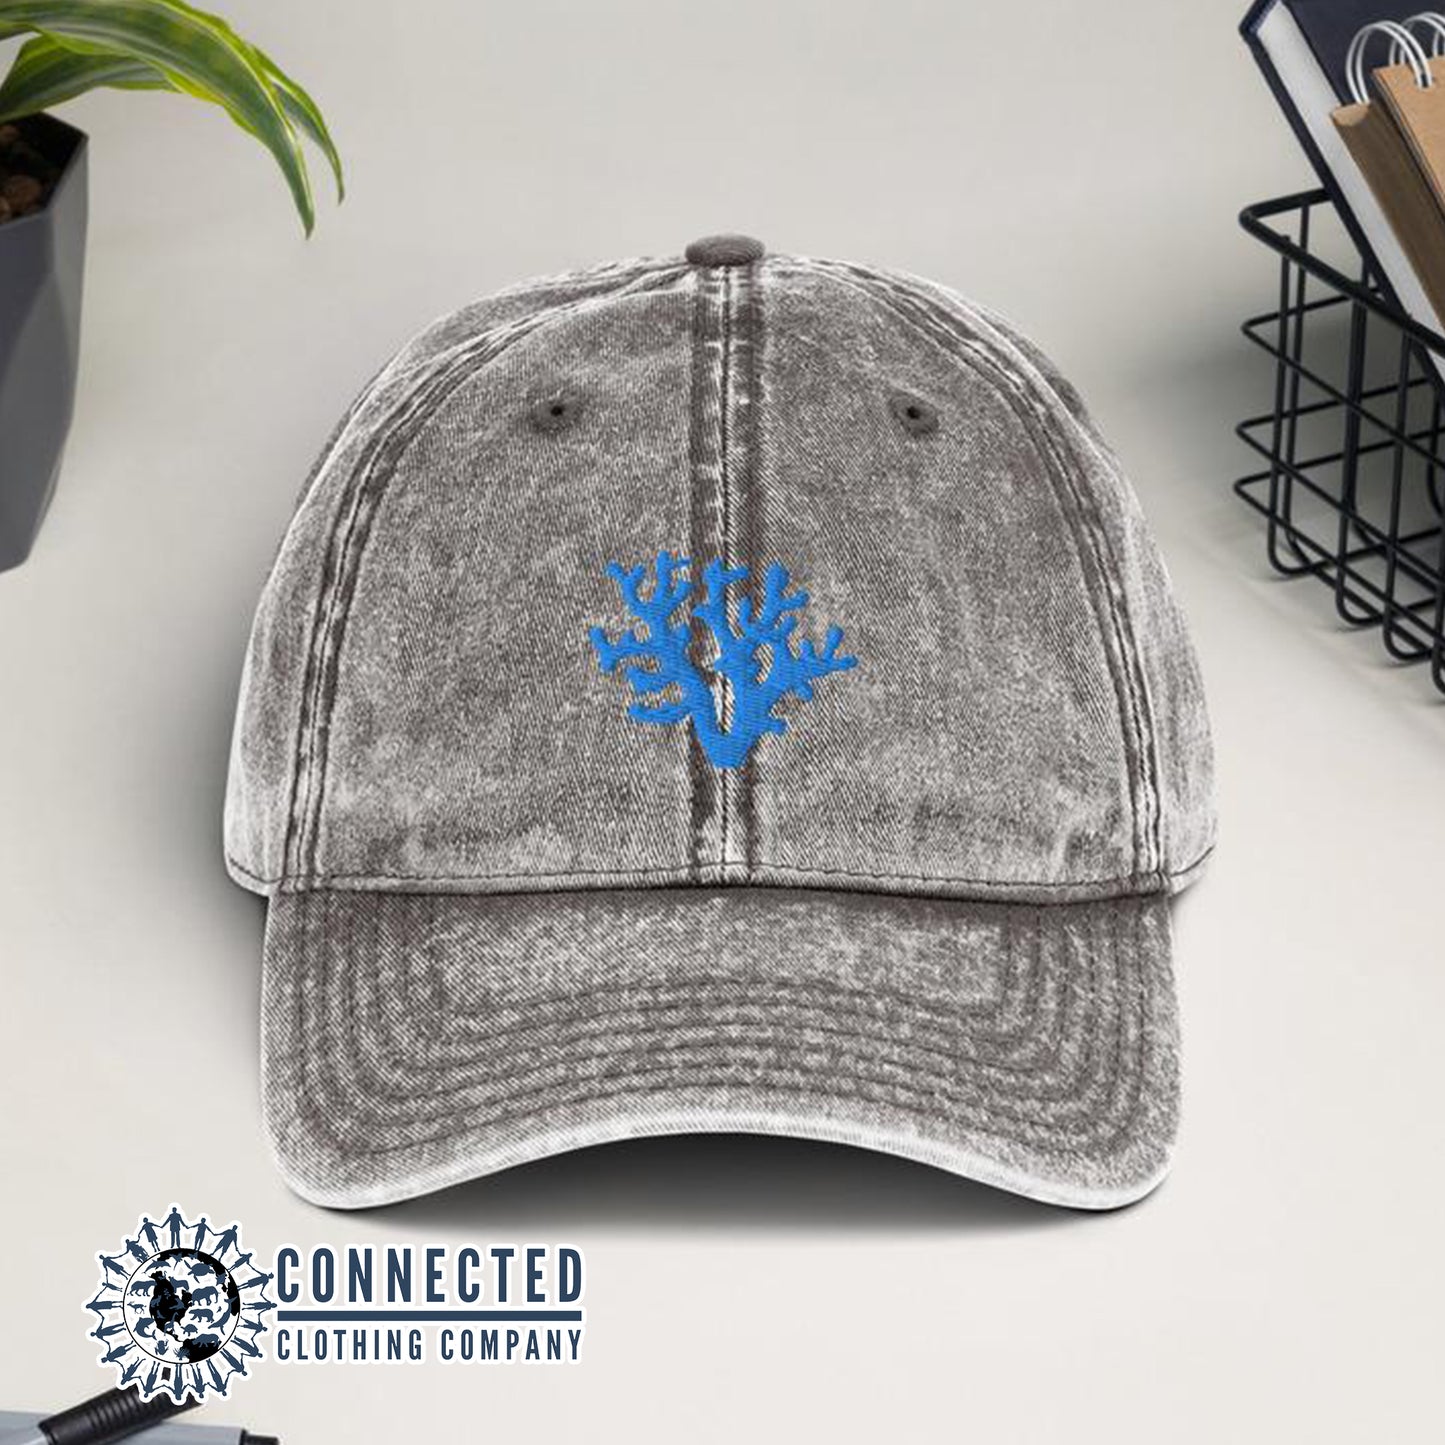 Grey Coral Vintage Cotton Cap - Connected Clothing Company - Ethically and Sustainably Made - 10% donated to Mission Blue ocean conservation